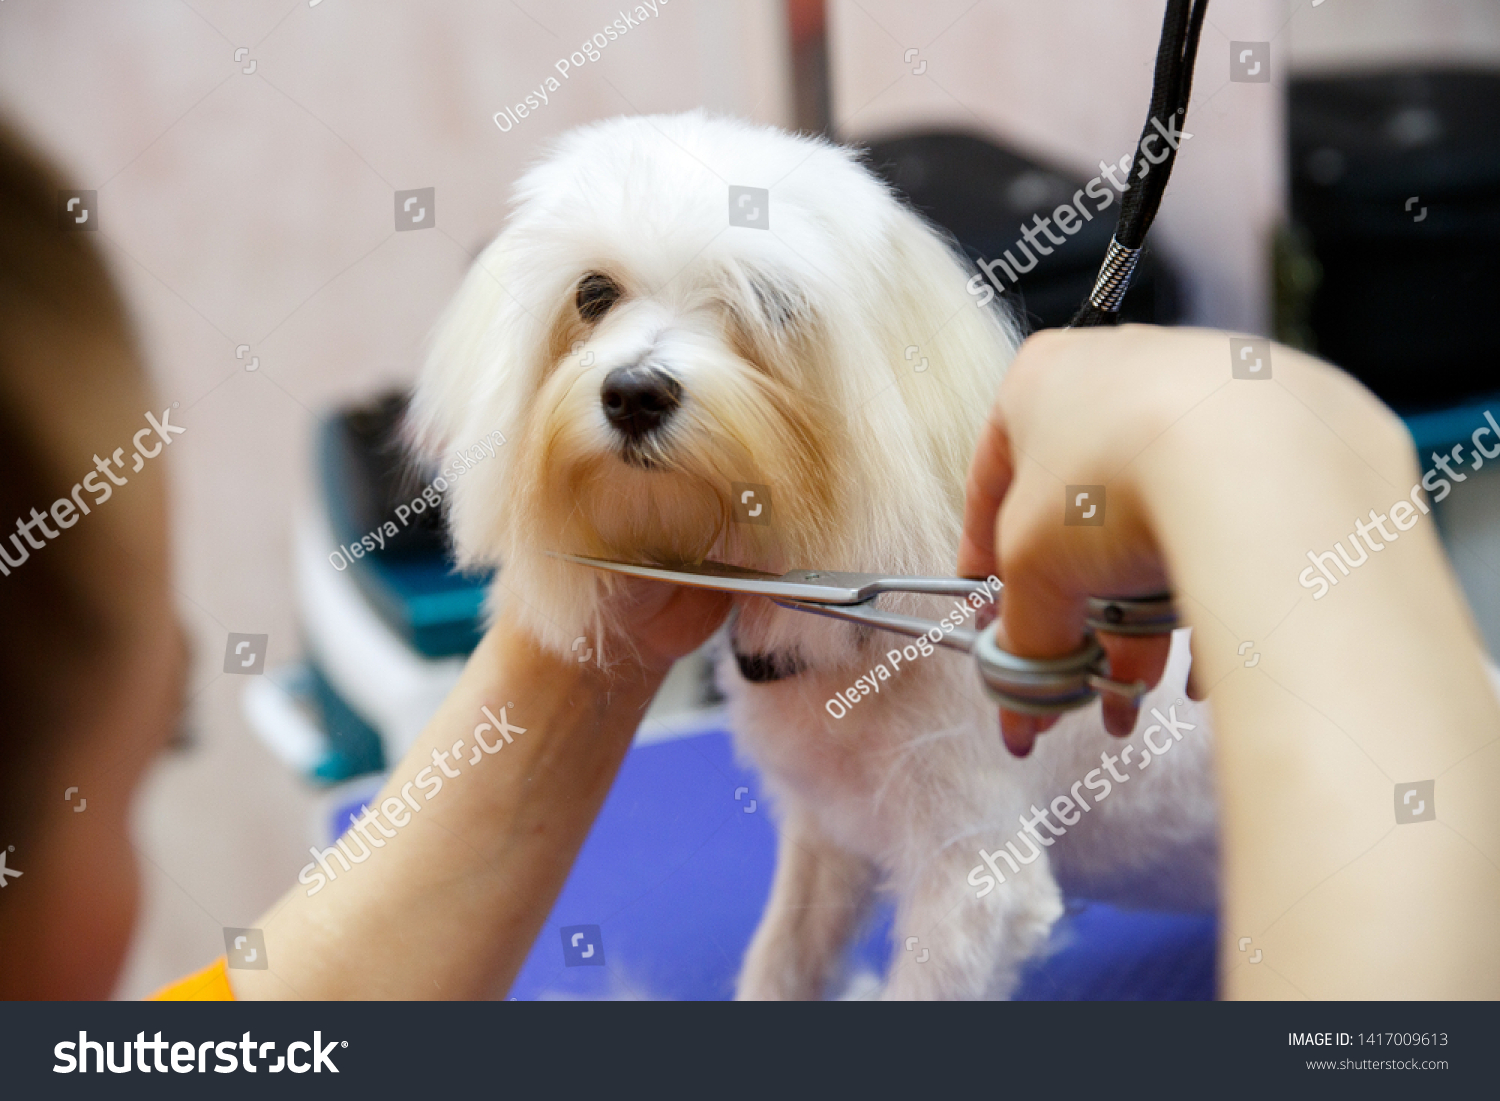 white poodle in the grooming salon, get a haircut/ Grooming animals, grooming, drying and styling dogs, combing wool. Grooming master cuts and shaves, cares for a dog. #1417009613